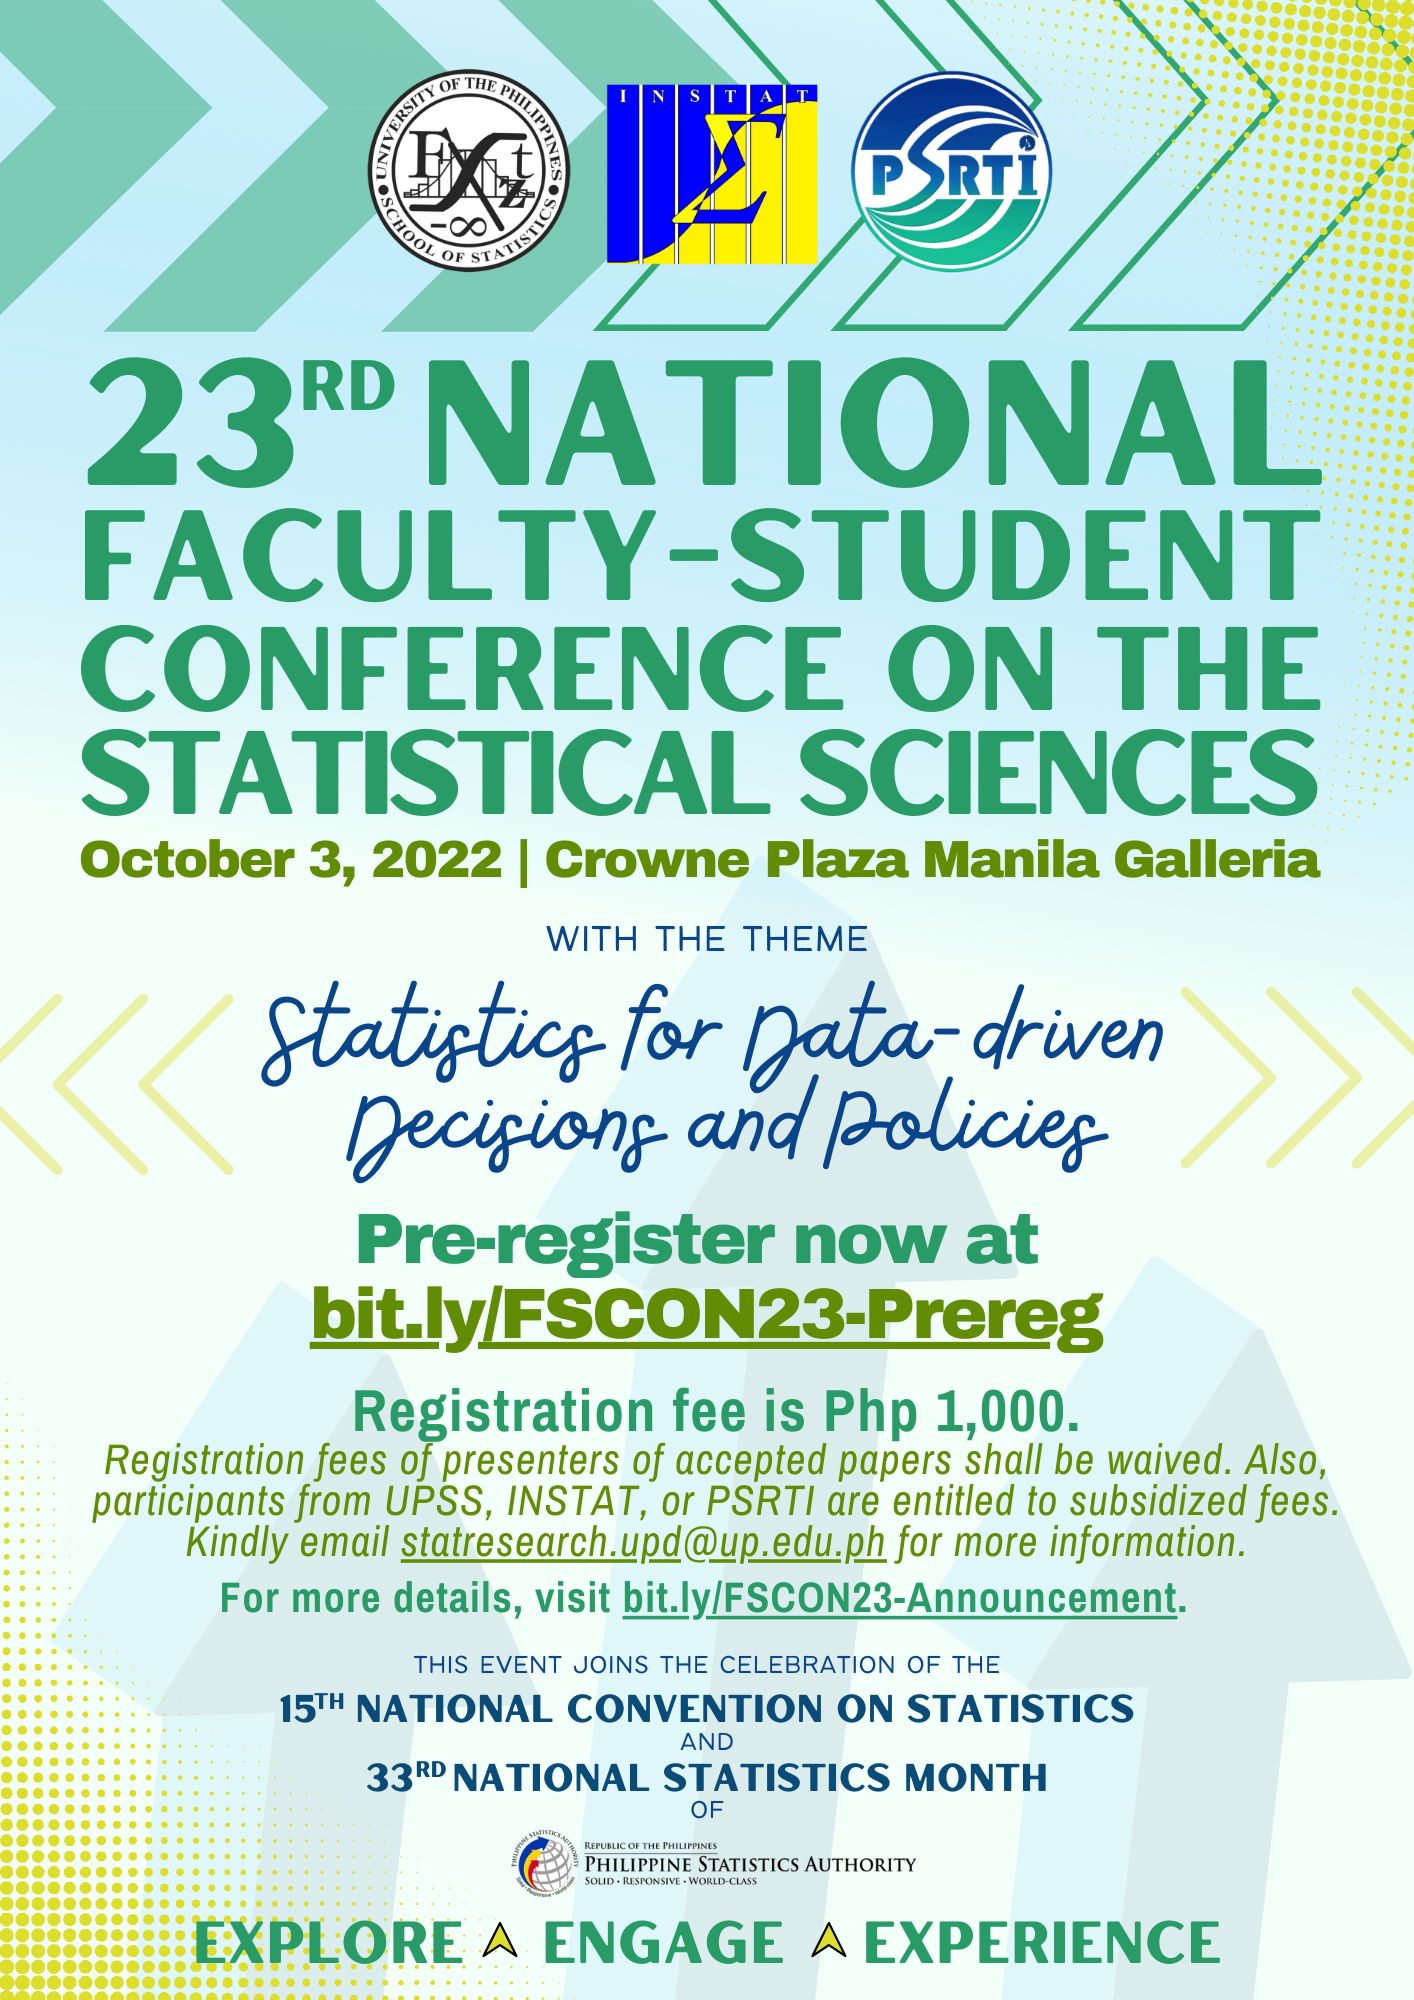 Image for 23RD NATIONAL FACULTY-STUDENT CONFERENCE ON THE STATISTICAL SCIENCES